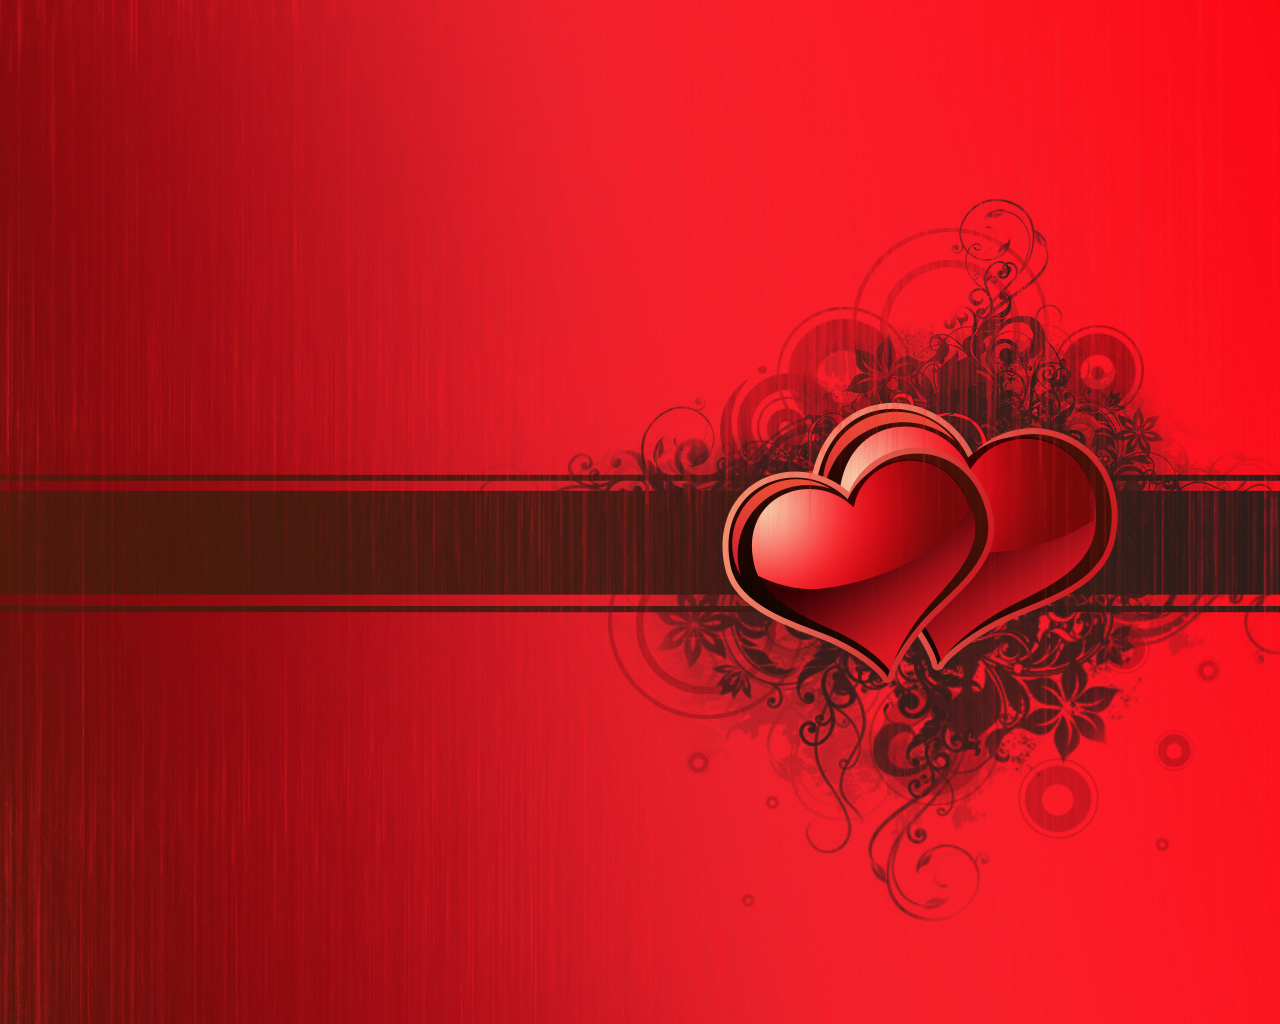 Valentine Wallpaper Images 16 High Resolution Wallpaper Images, Photos, Reviews